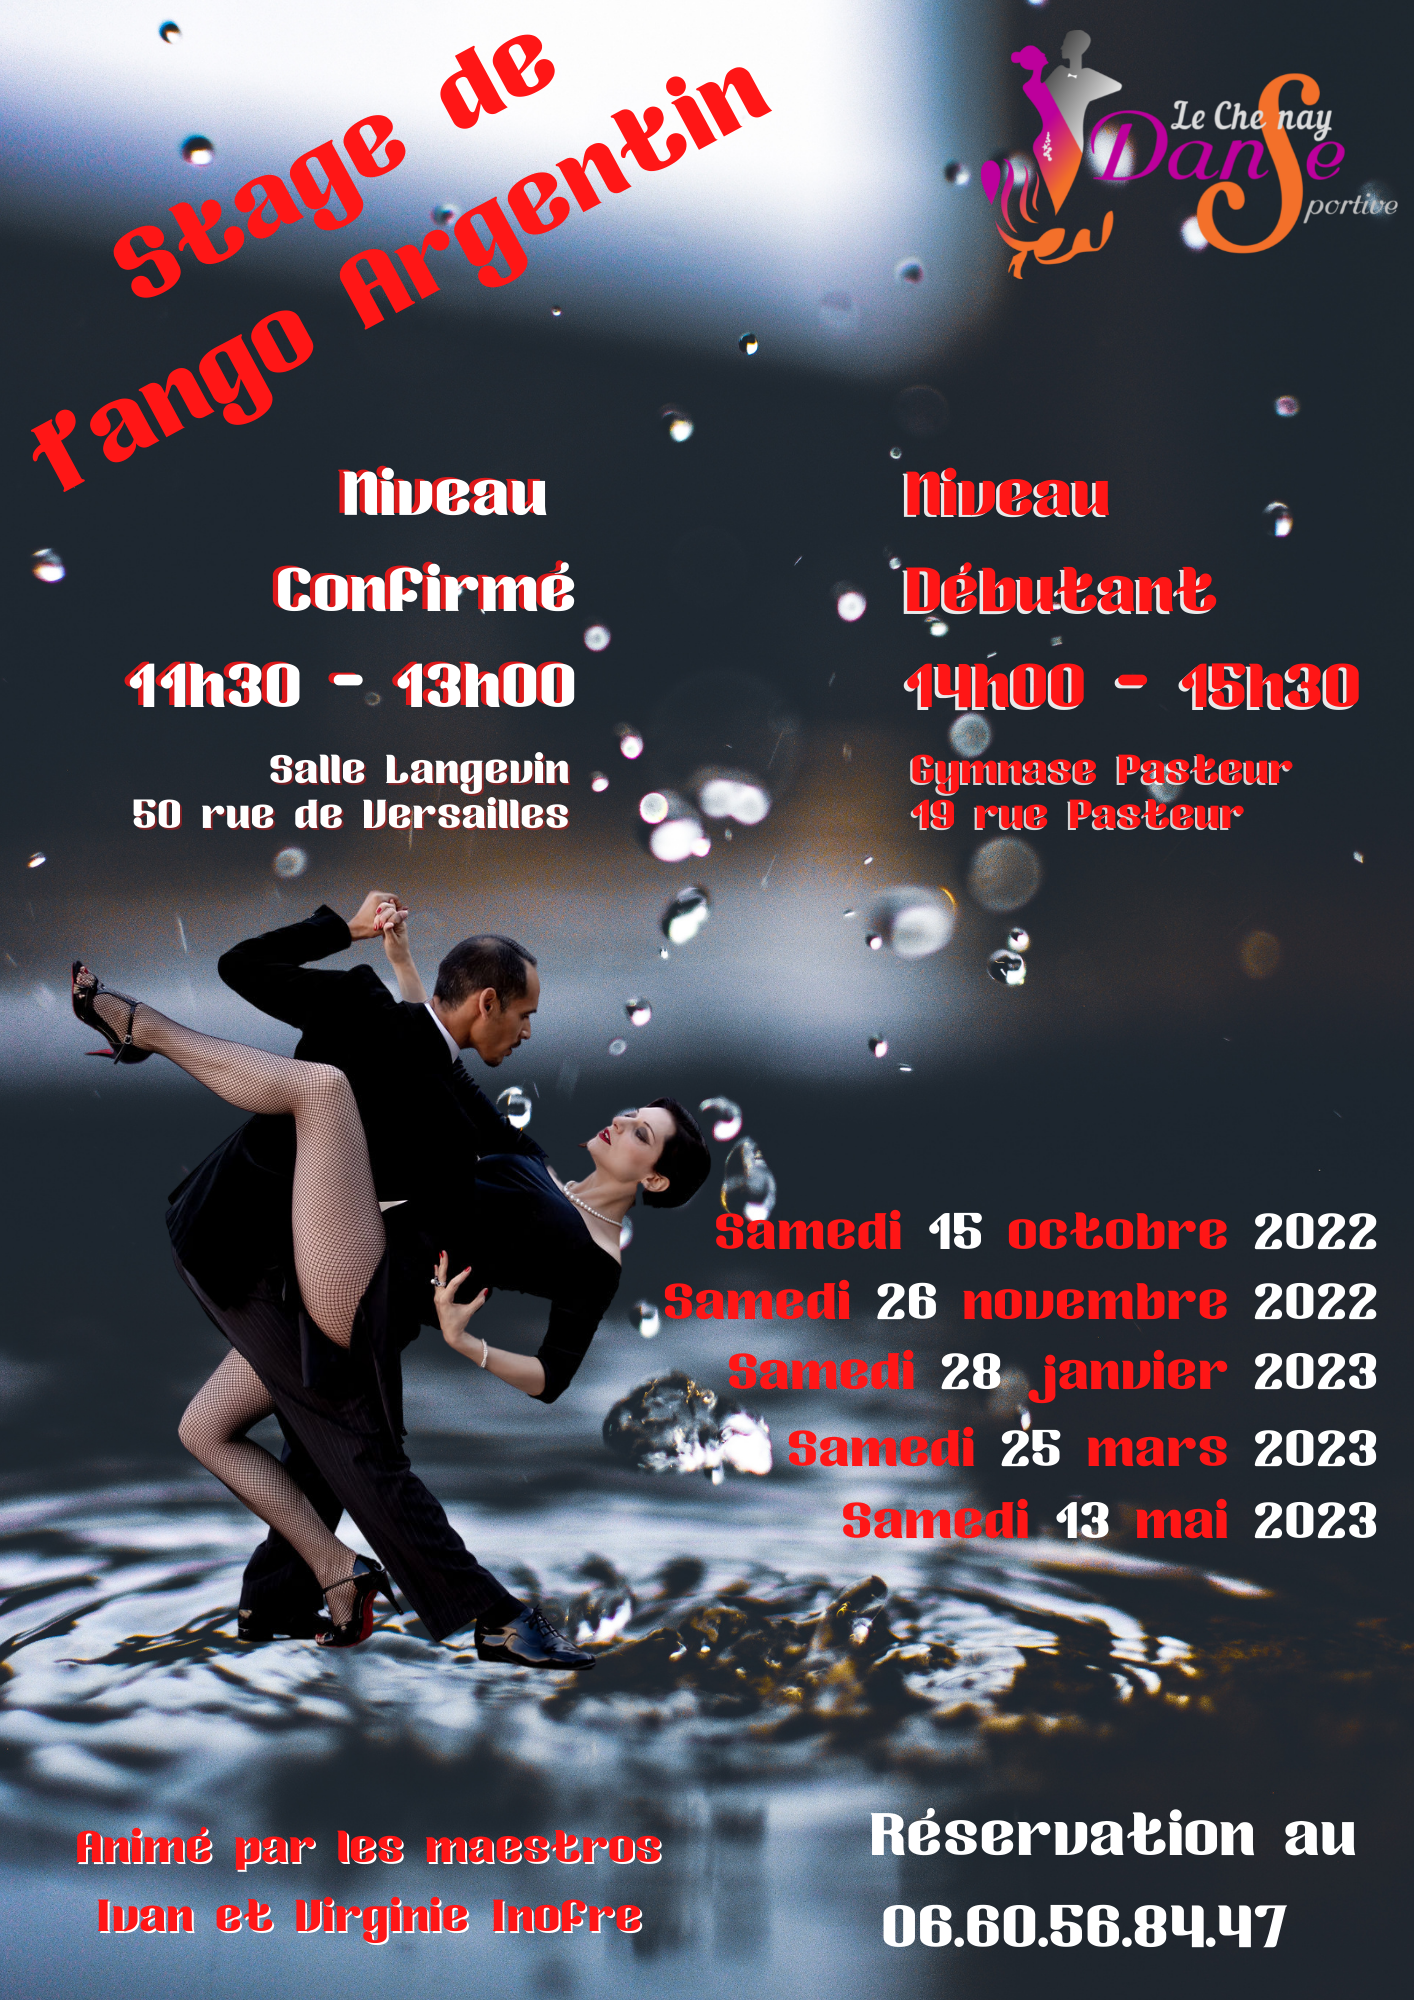 You are currently viewing TANGO ARGENTIN Saison 2022 / 2023